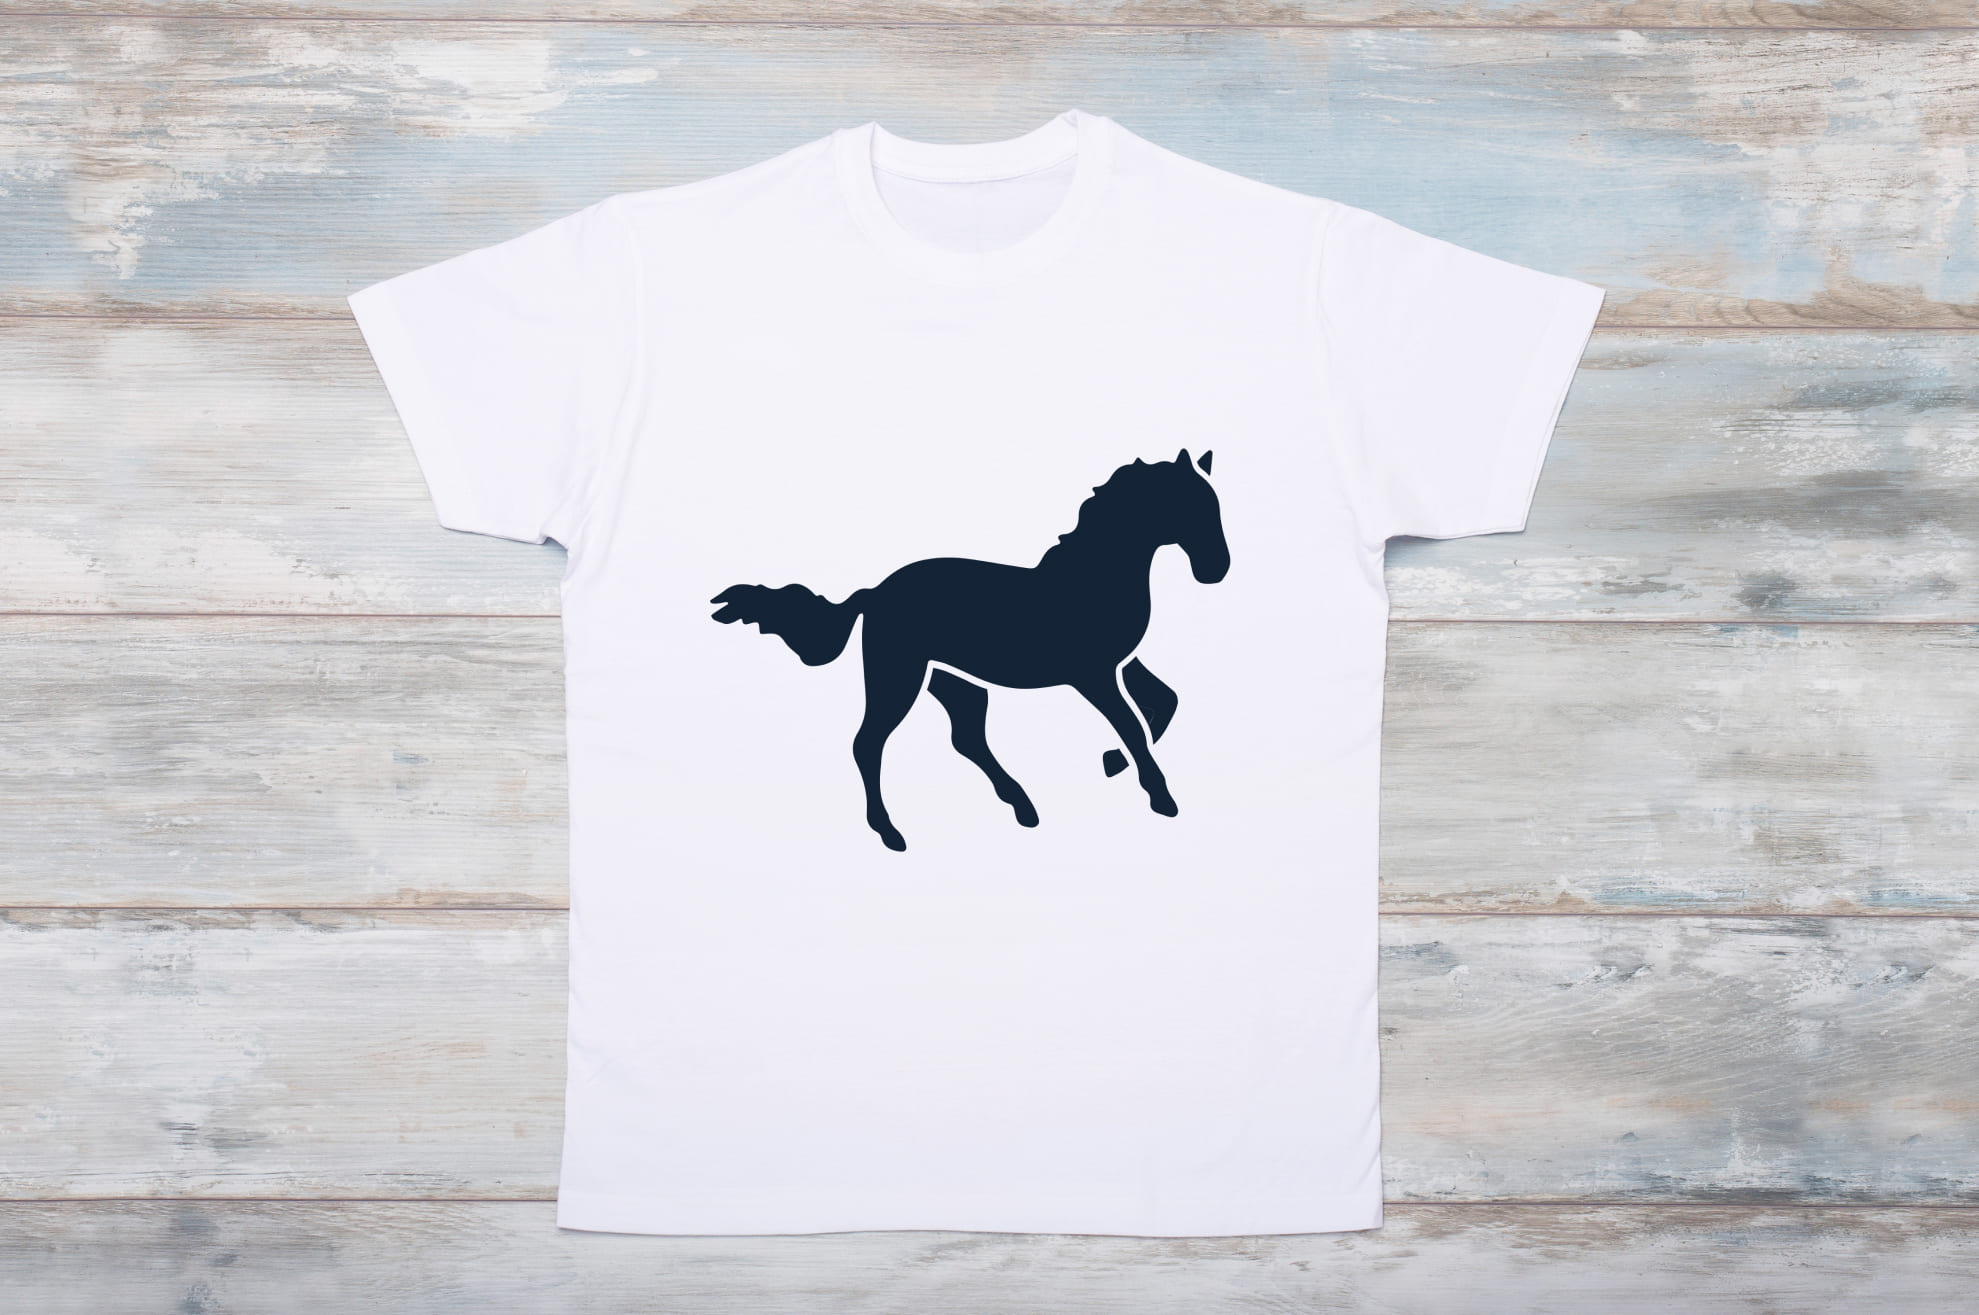 White t-shirt with a black silhouette of a running horse on the wooden background.